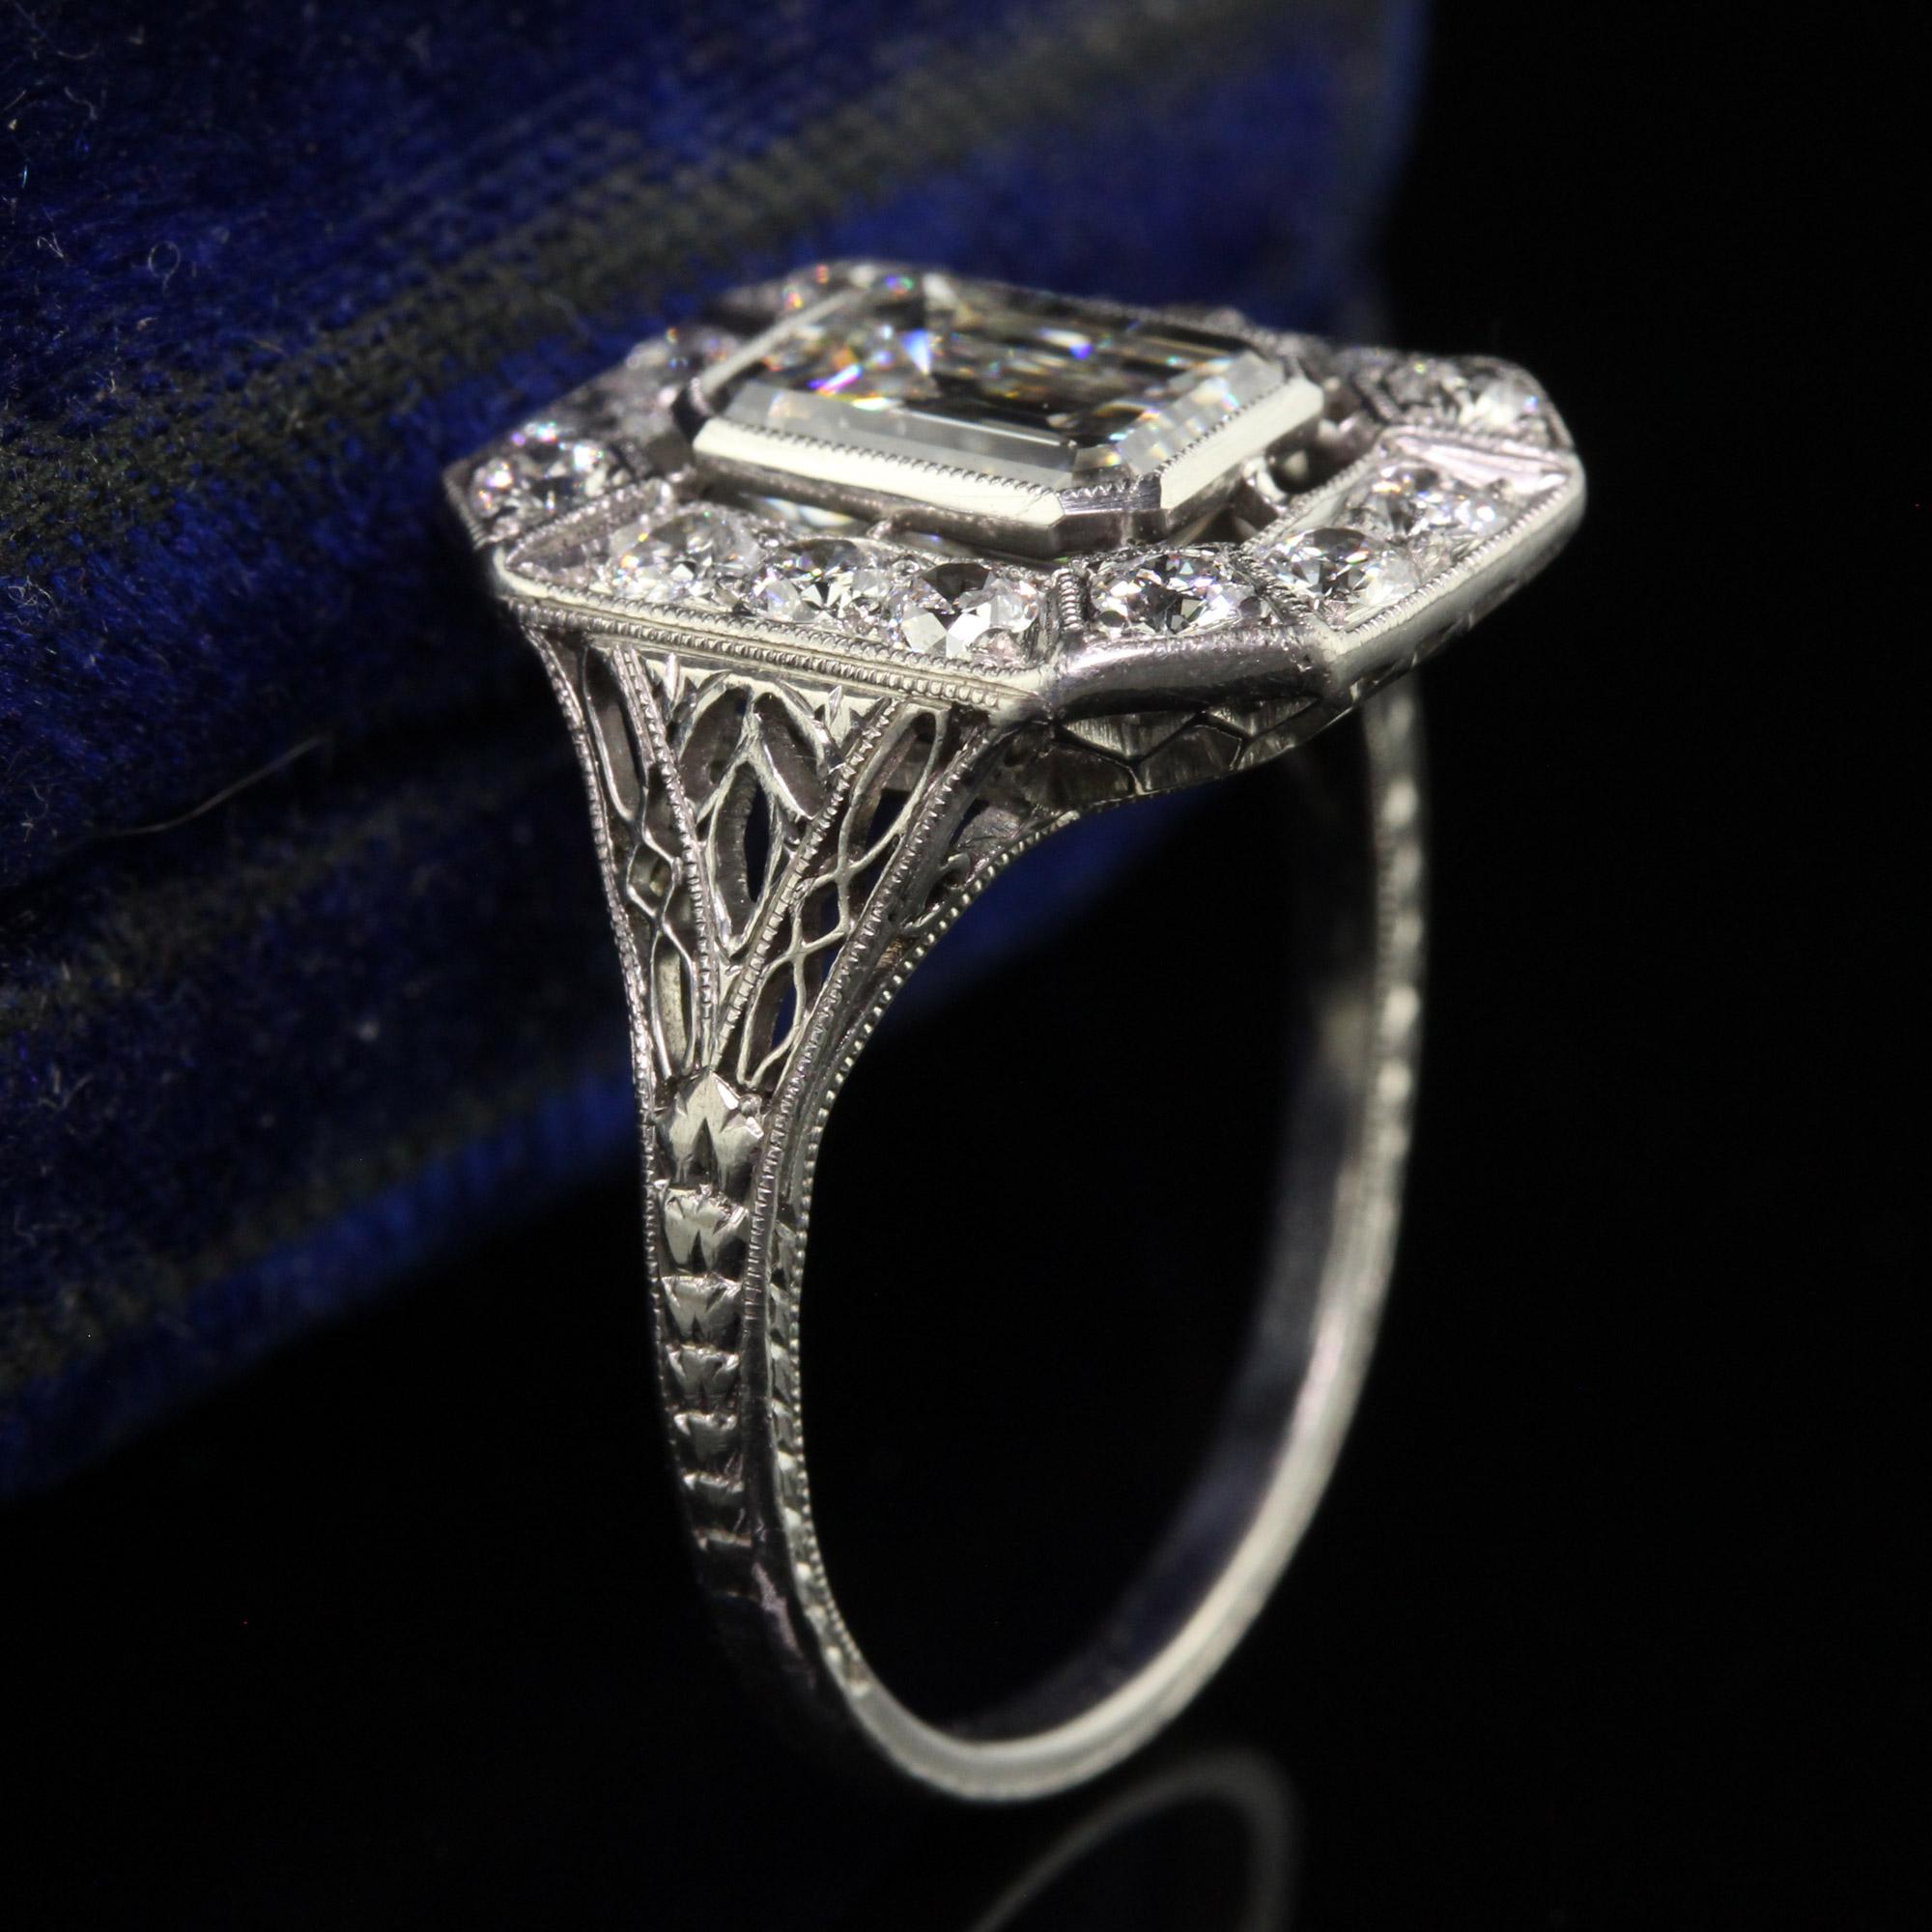 Antique Art Deco Emerald Cut Diamond Filigree Engagement Ring - GIA In Good Condition For Sale In Great Neck, NY